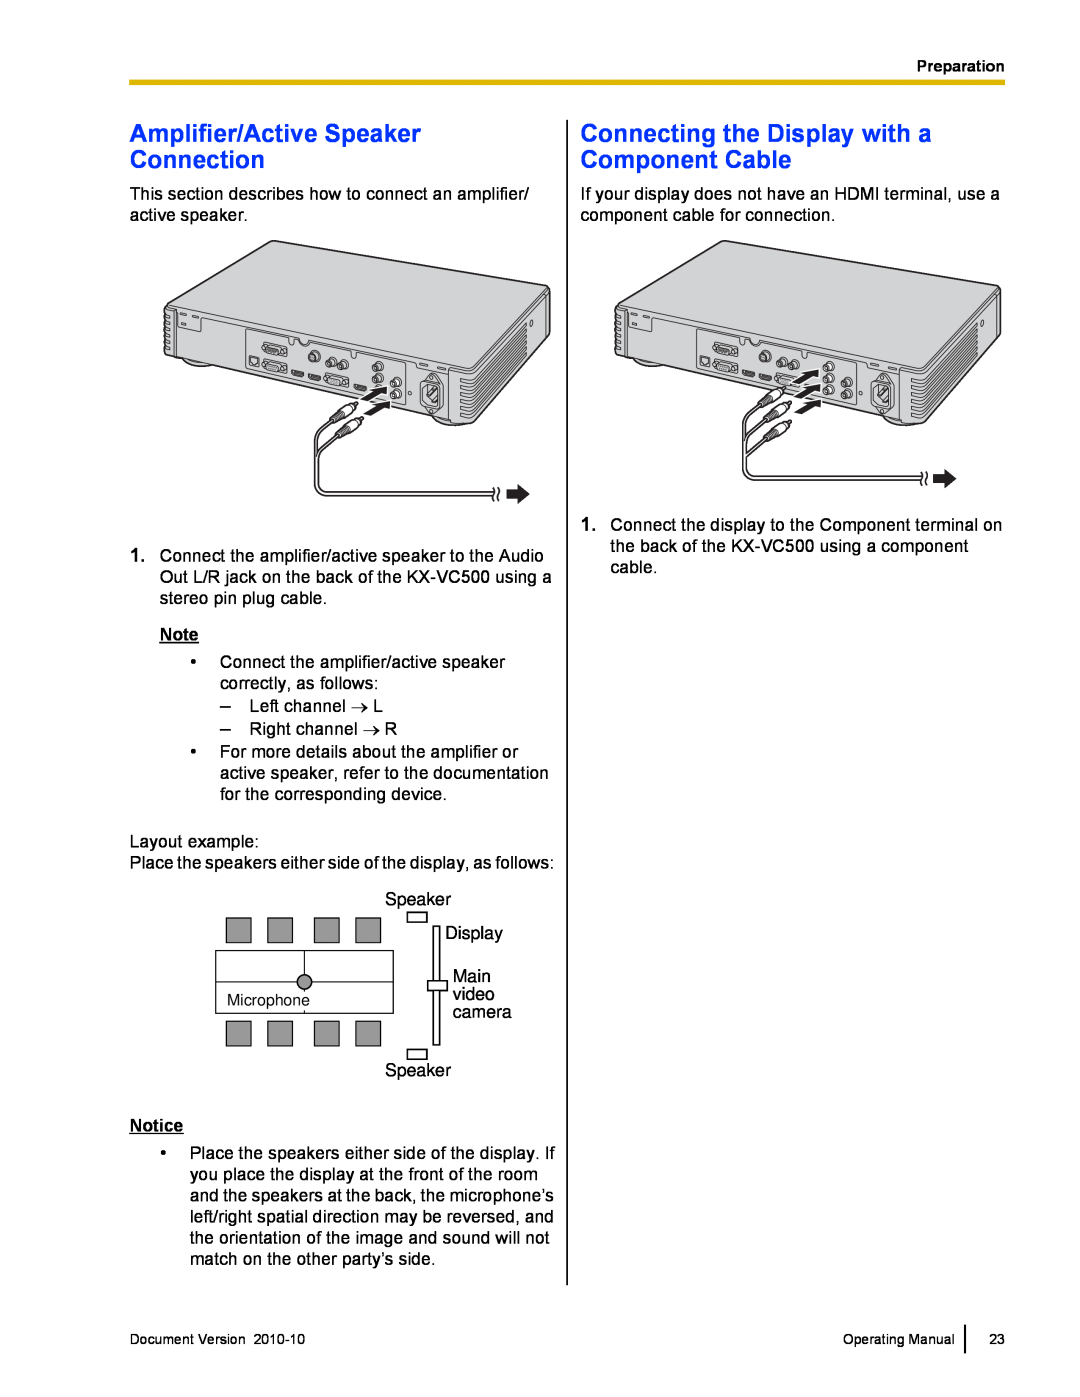 Panasonic KX-VC500 manual Amplifier/Active Speaker Connection, Connecting the Display with a Component Cable 